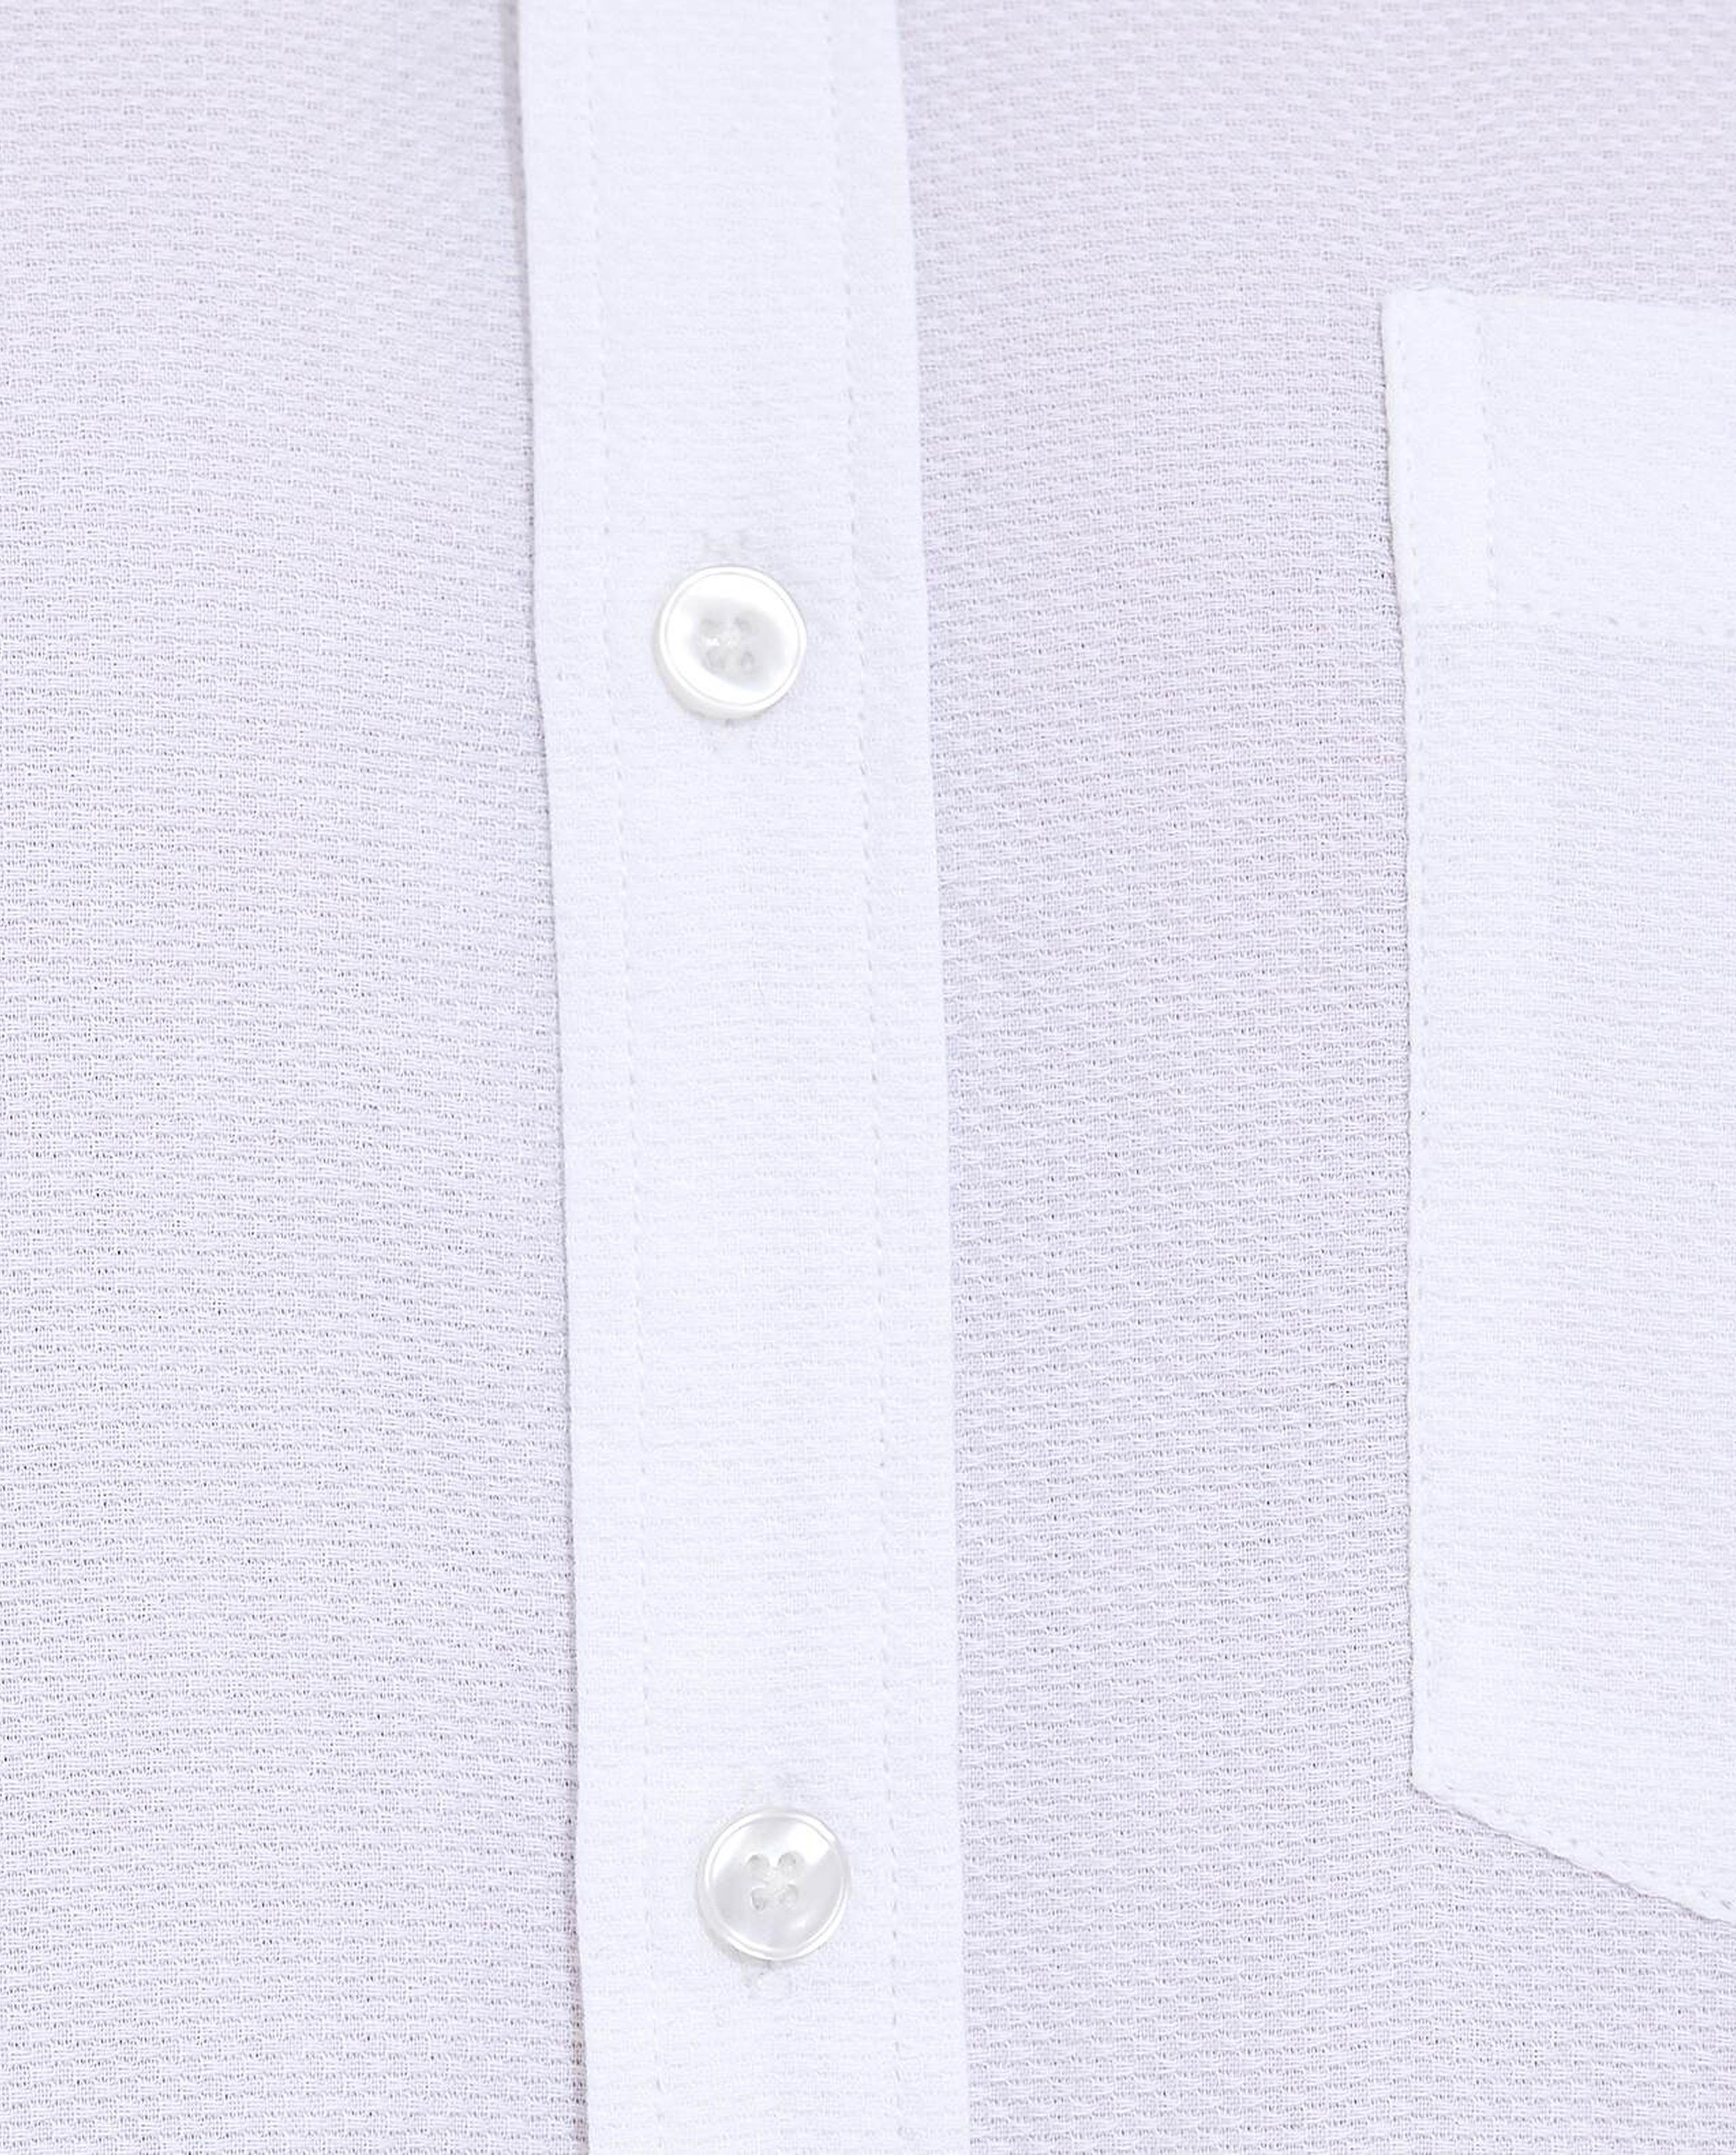 Solid Shirt with Classic Collar and Short Sleeves